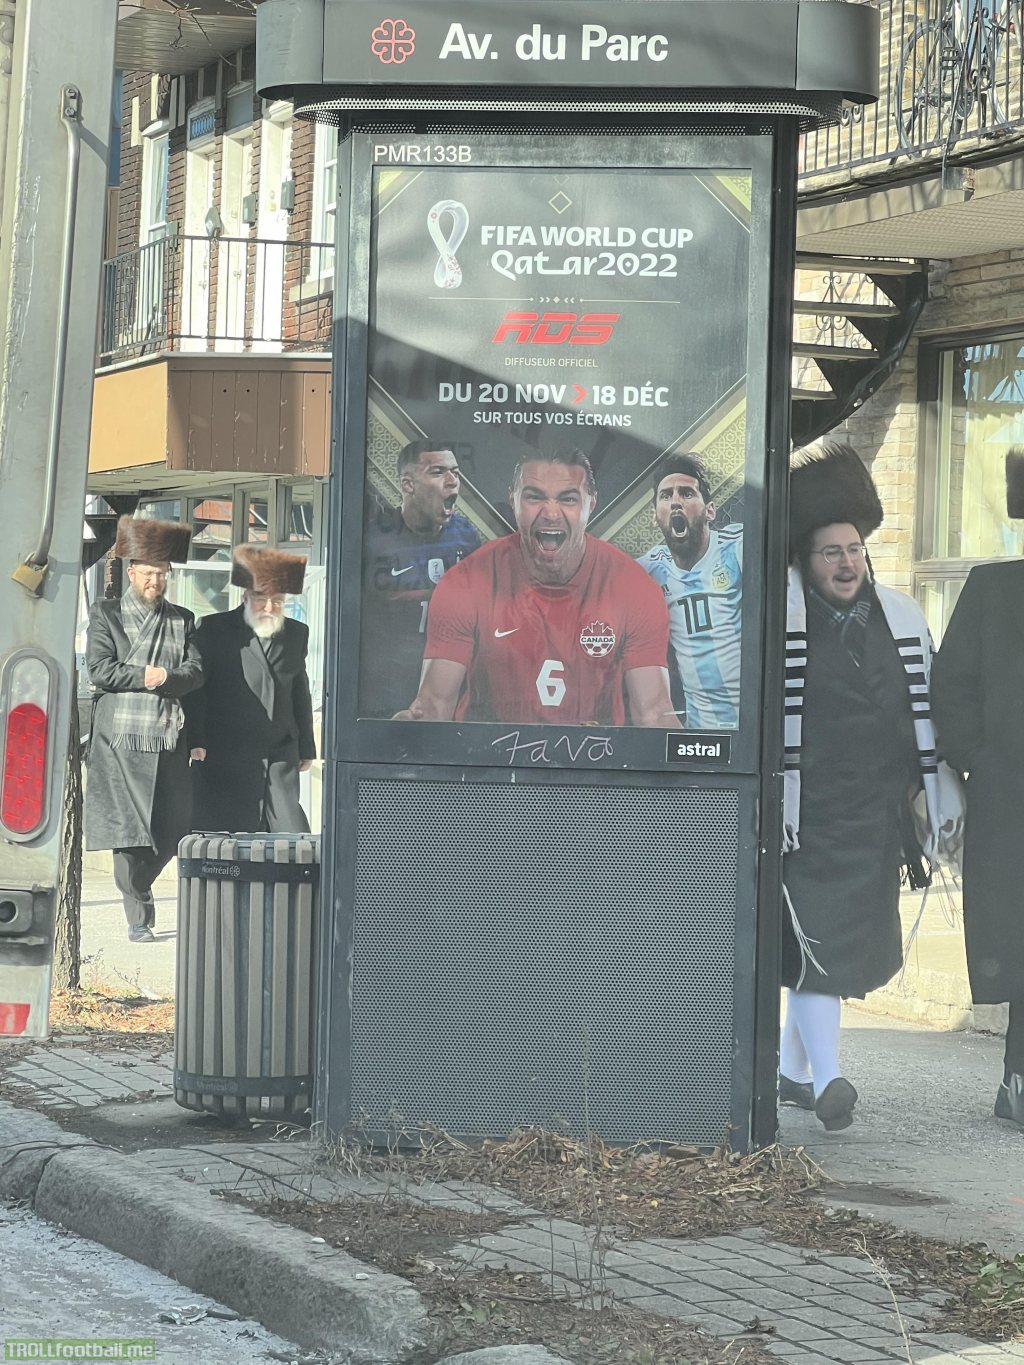 Montreal knew it who will reach to final- Messi vs Mbappe